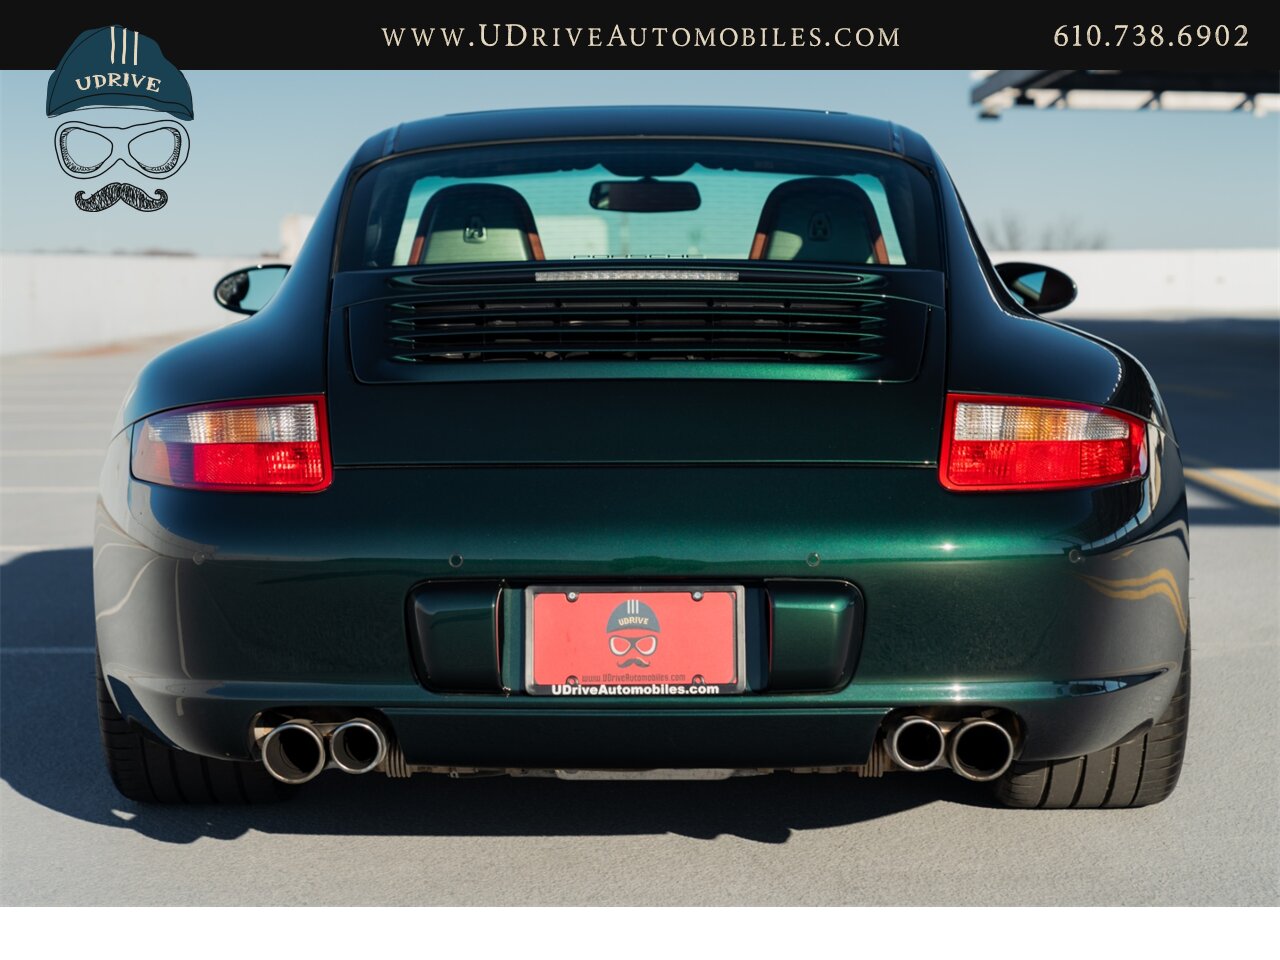 2007 Porsche 911 Carrera S 6Spd 997S RARE X51 Power Kit 381hp  1 of a Kind Forest Green over Blk/Terracotta Chrono Adap Sport Sts $113k MSRP - Photo 21 - West Chester, PA 19382